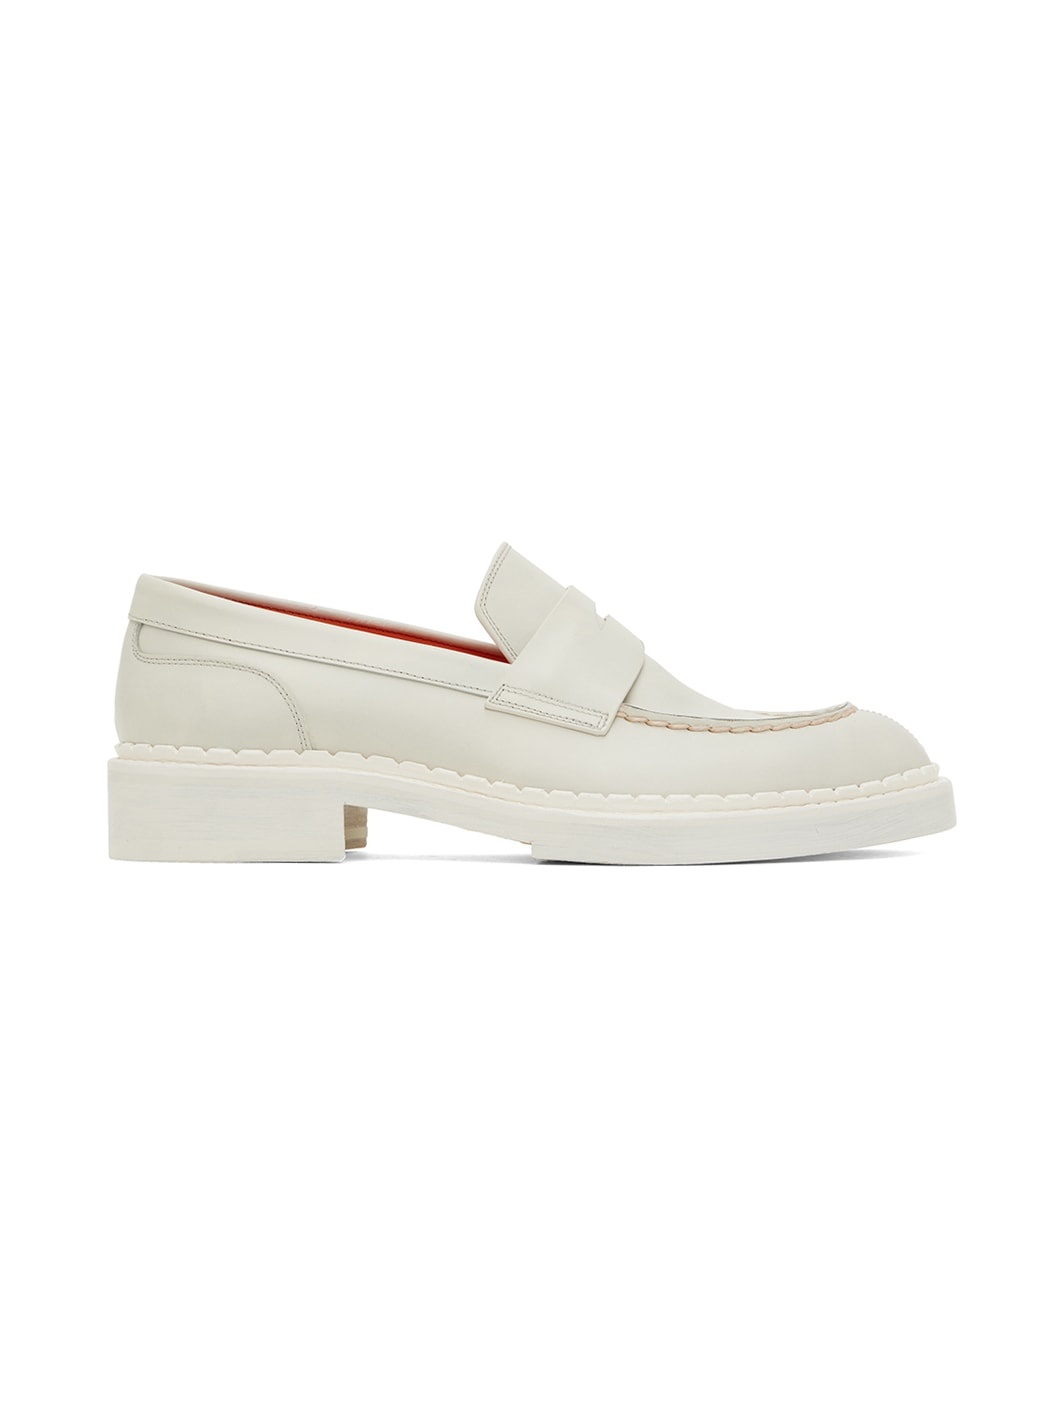 Off-White Leather Loafers - 1